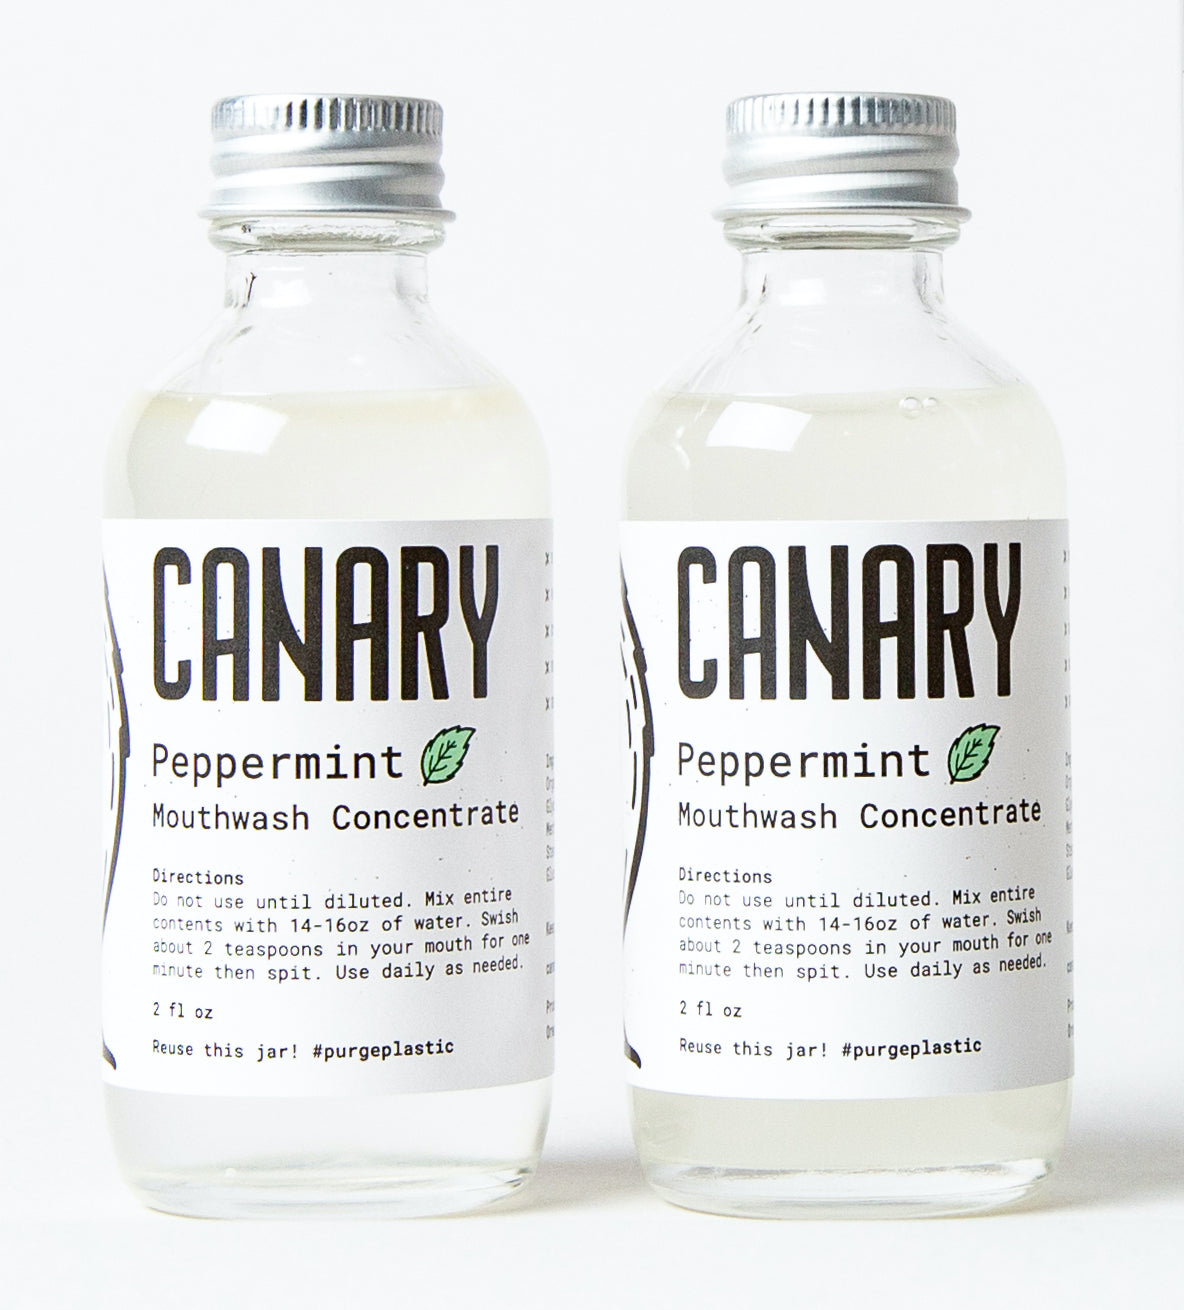 Canary Peppermint Mouthwash Concentrate 4 Month Refill Pack, containing 2 of the 2 fluid ounce concentrate jars